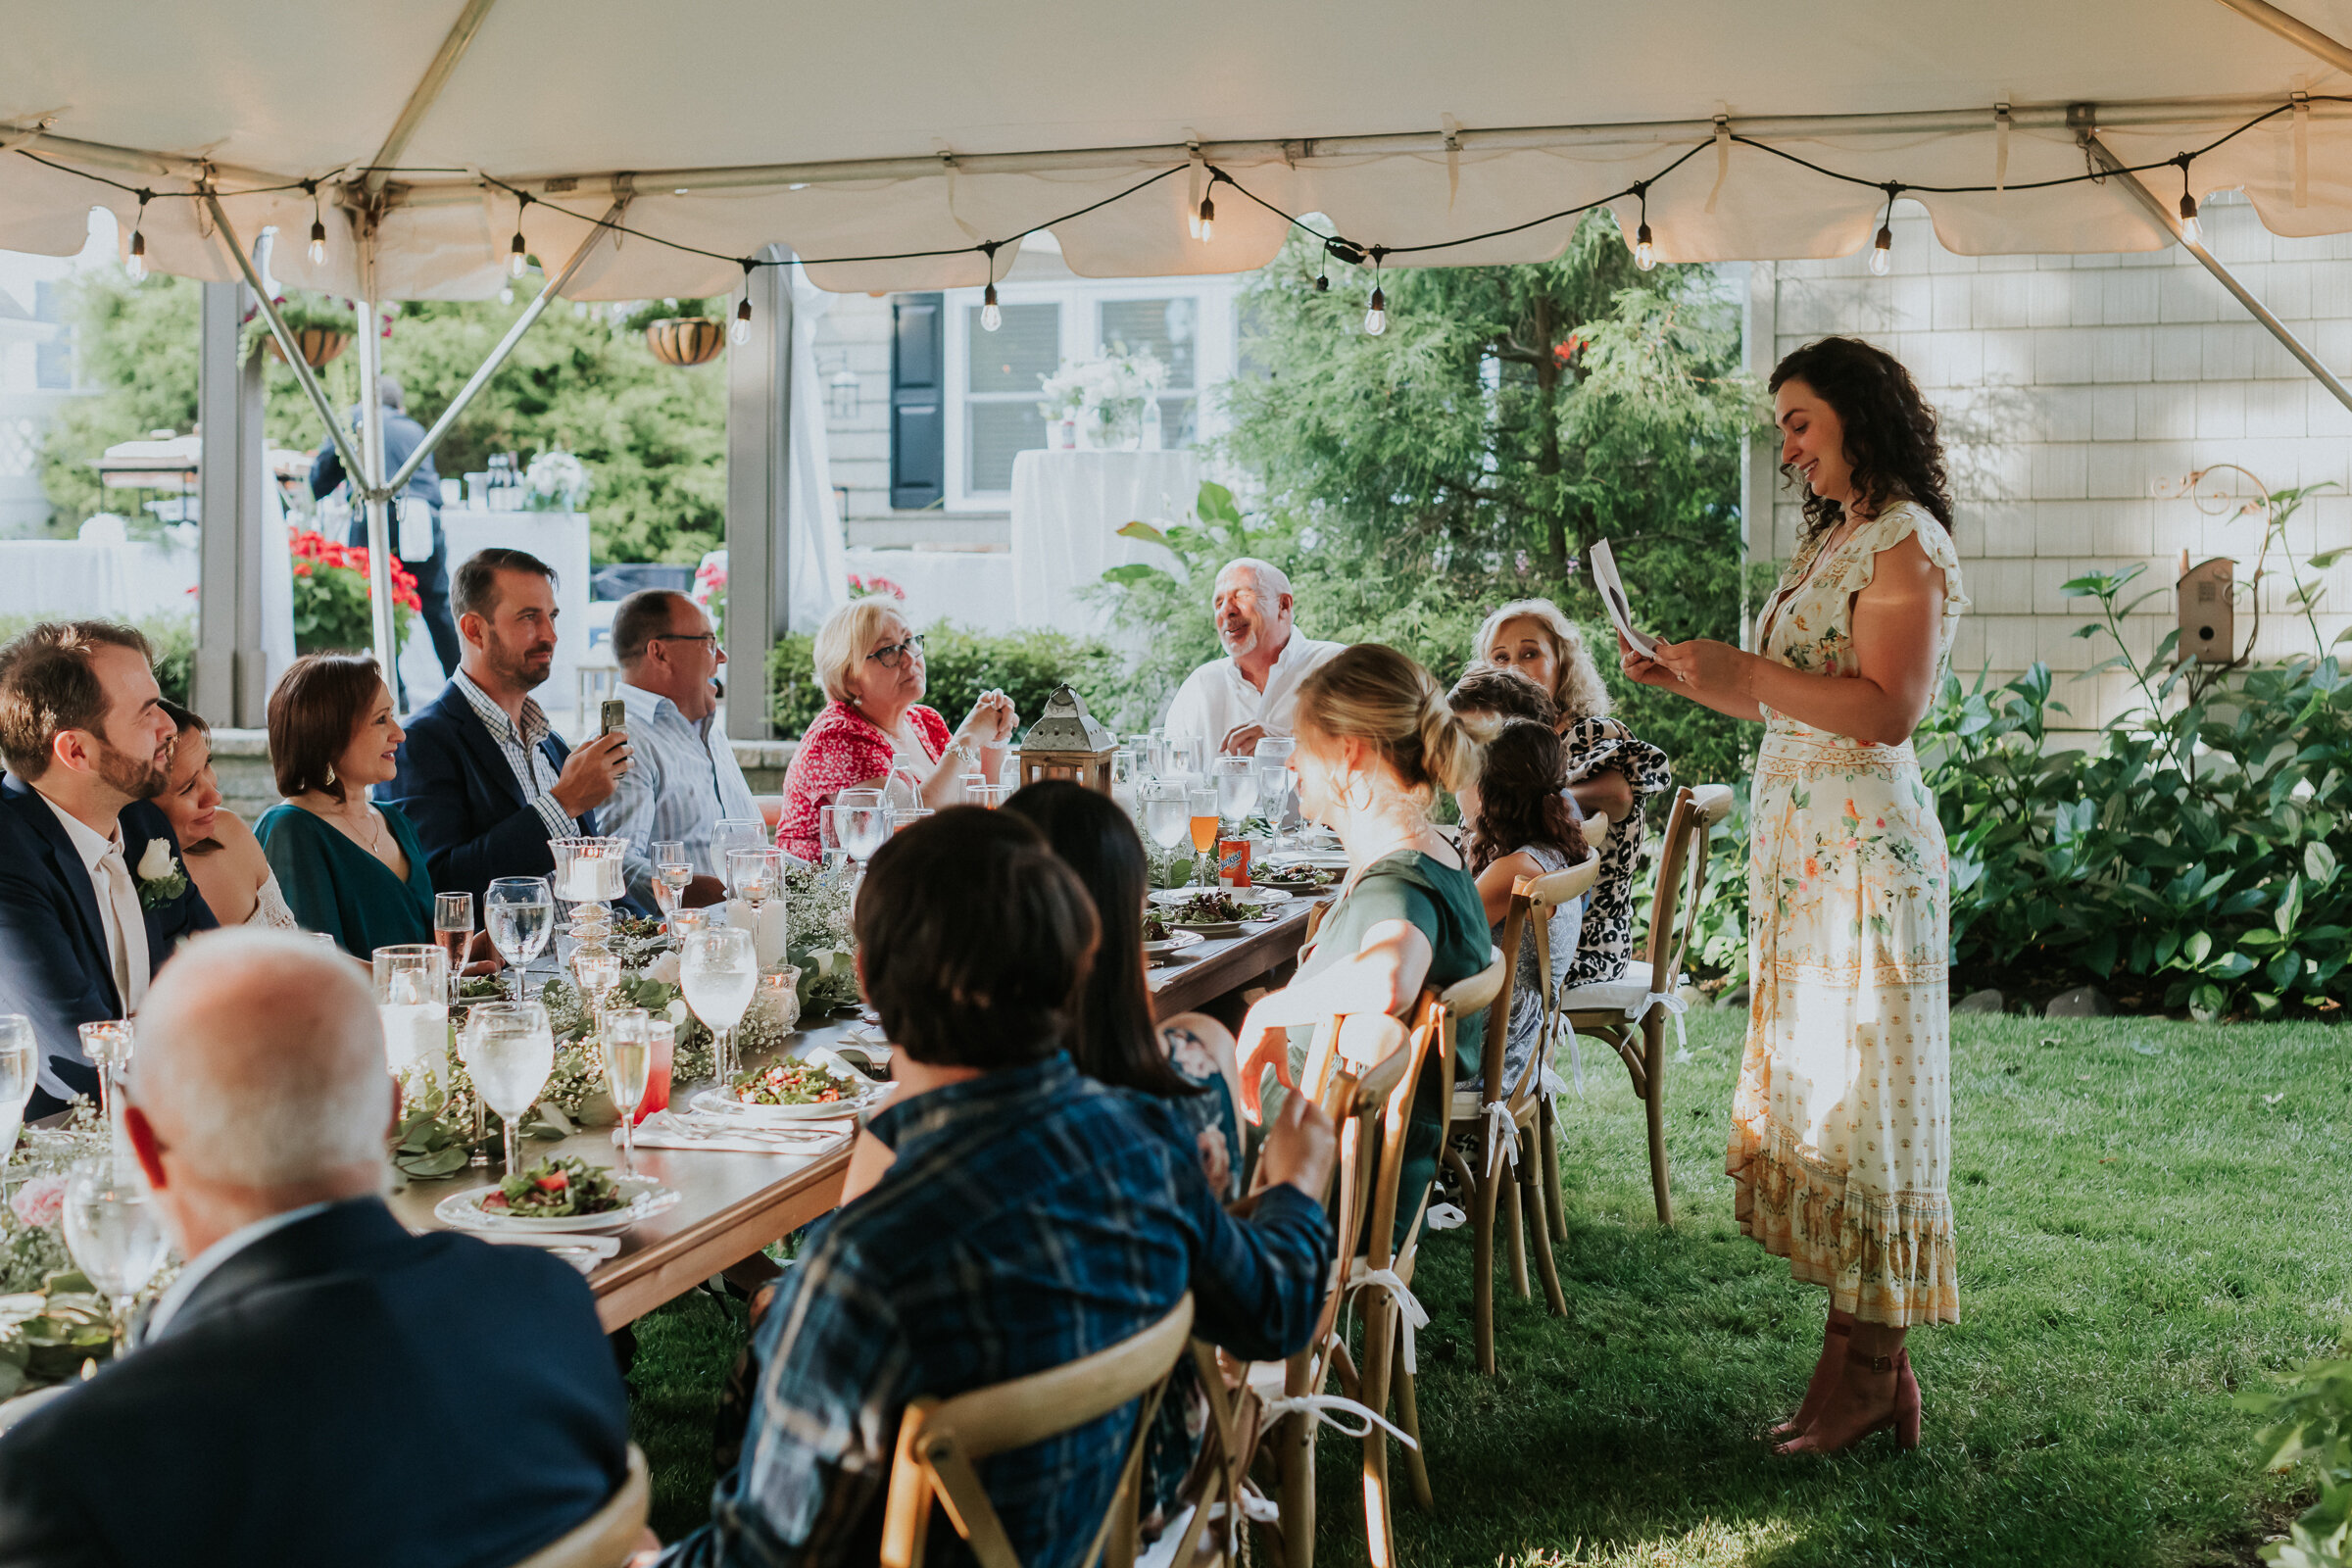 Lyndsay and Dan were one of the brave ones who decided to downsize and reminded us all that backyard weddings can be awesome!